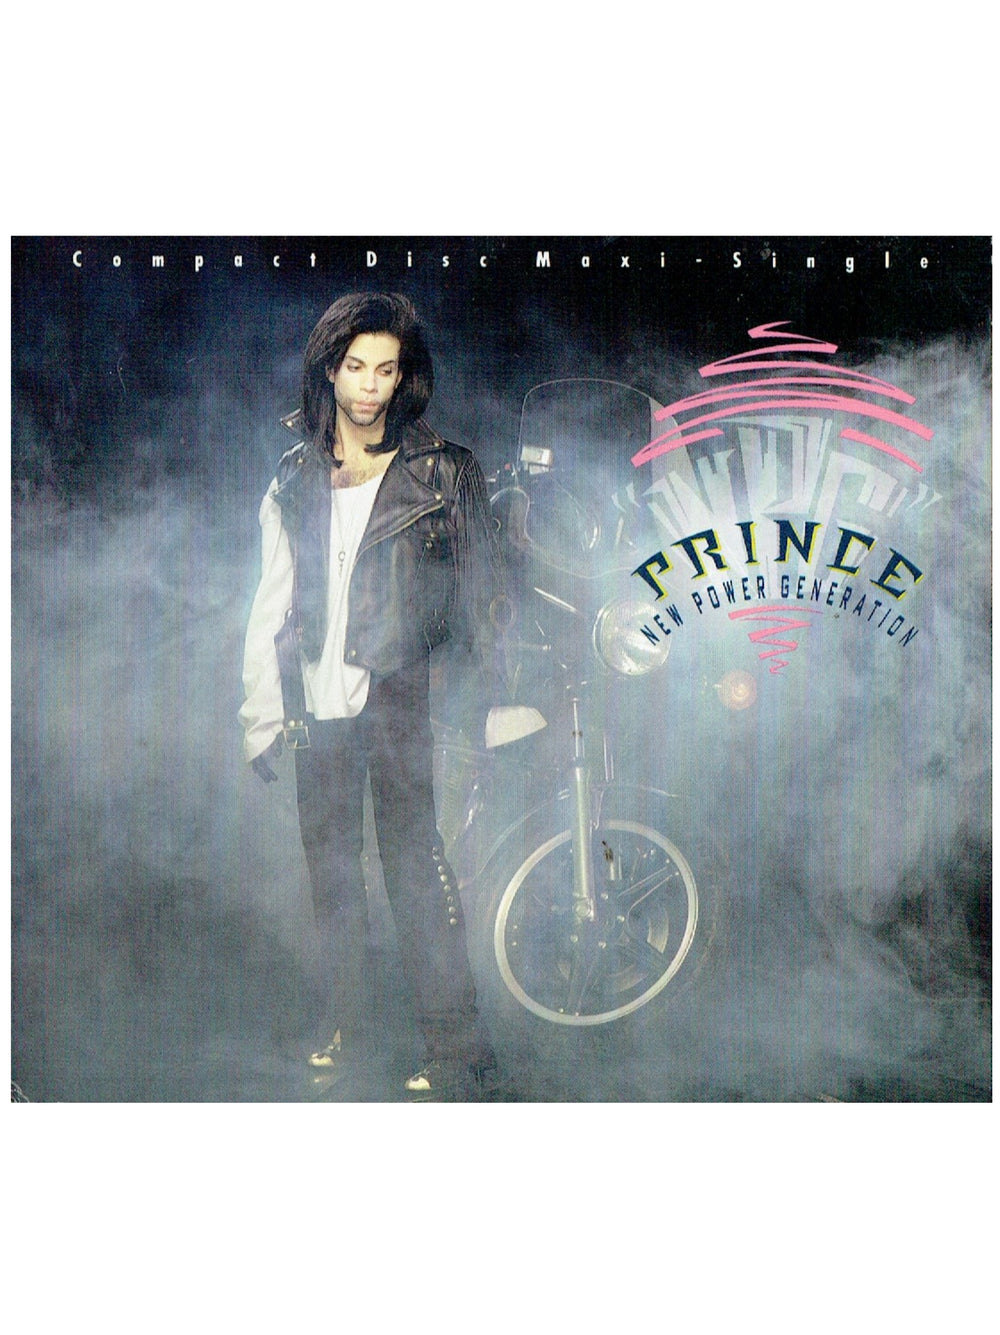 Prince – New Power Generation - CD Maxi Single US Preloved: 1990